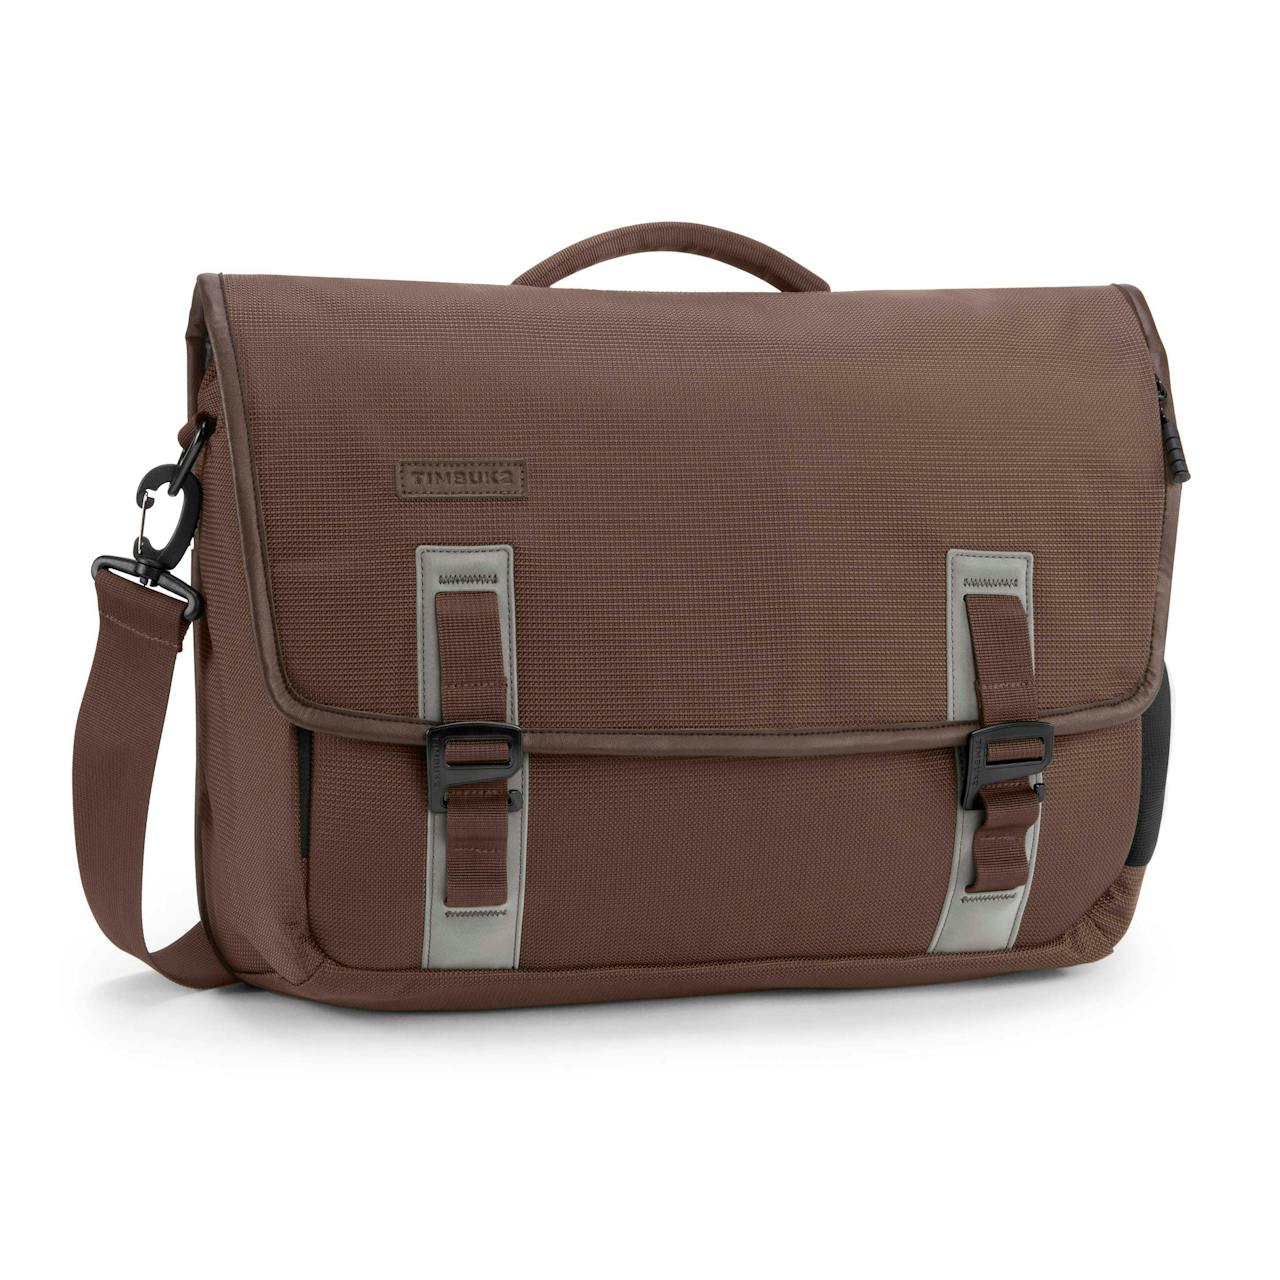 Timbuk2 Command Messenger - True Brown, undefined